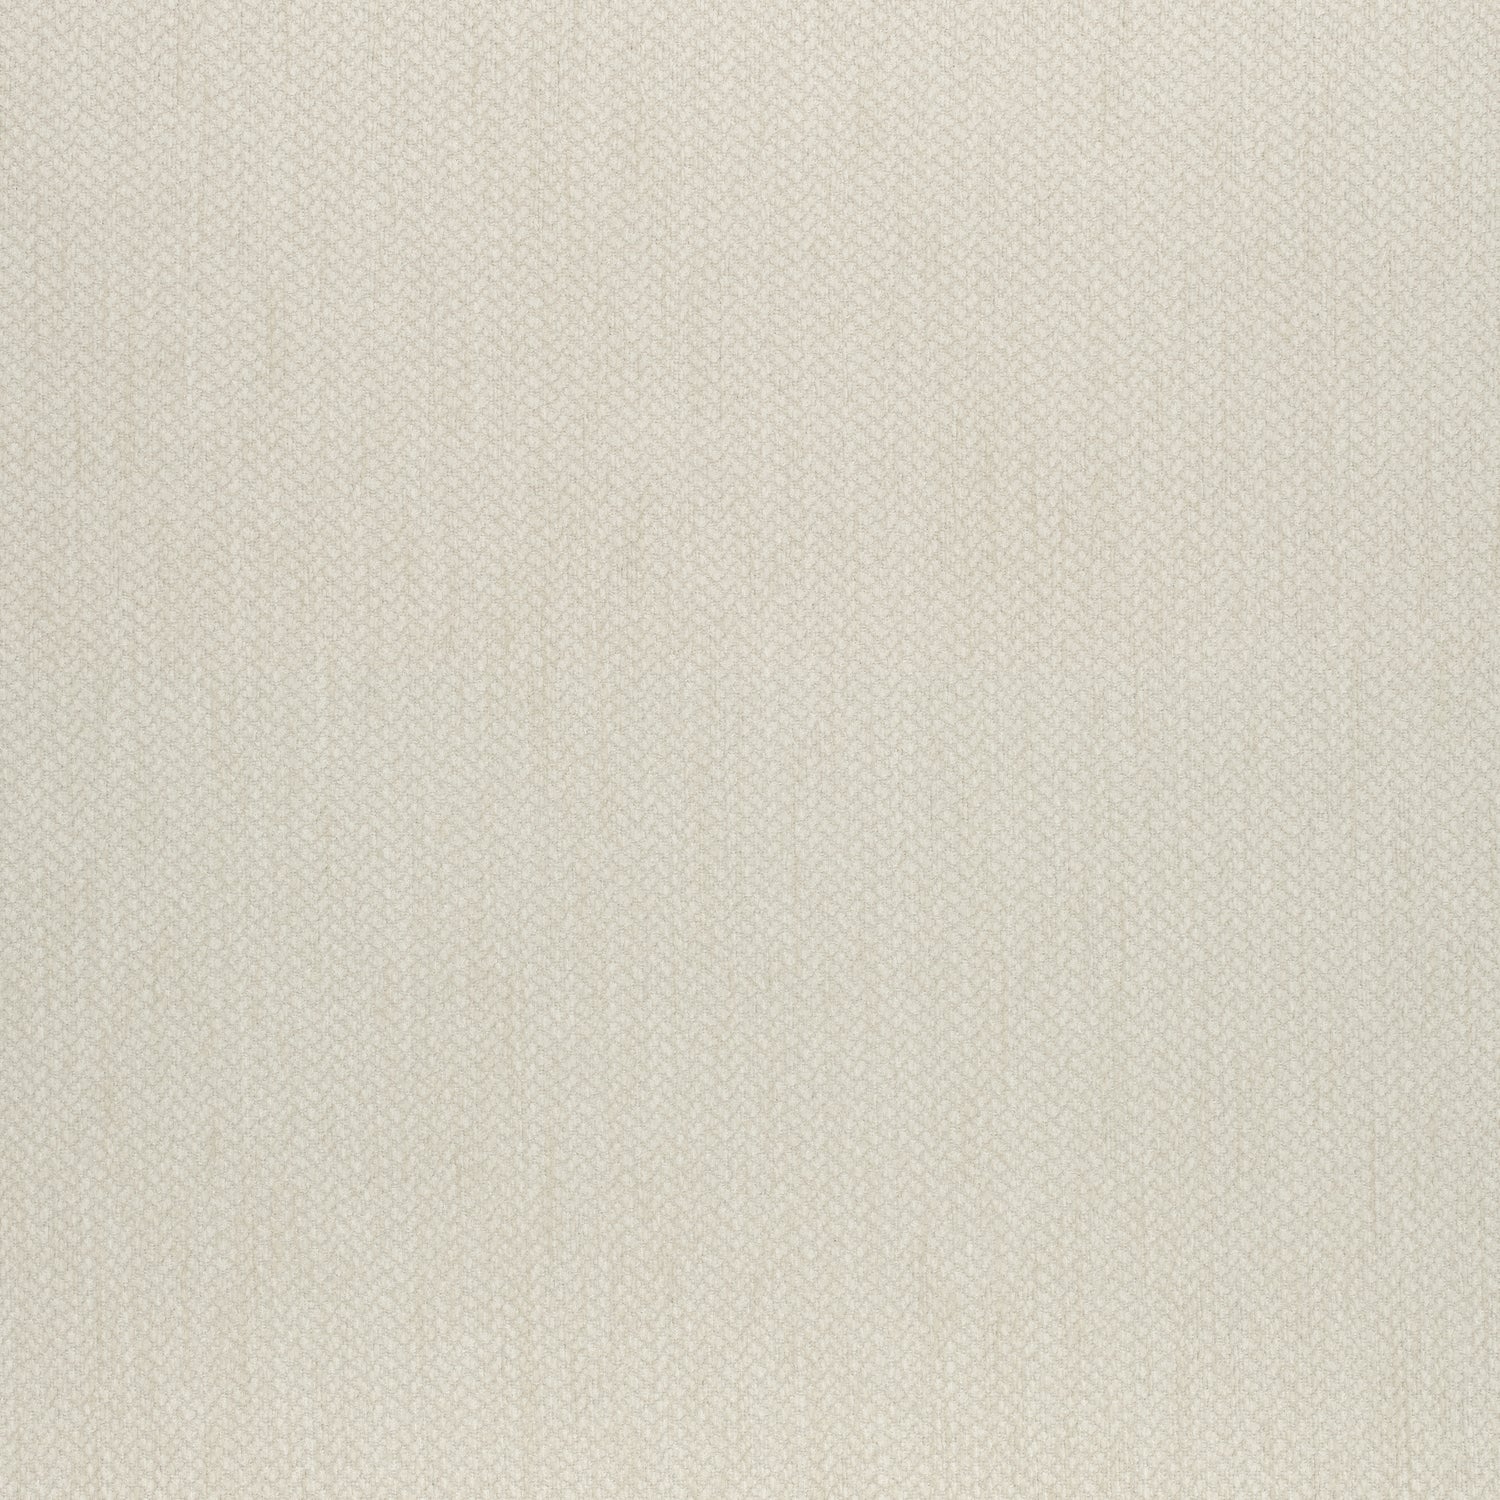 Orion fabric in flax color - pattern number W80472 - by Thibaut in the Mosaic collection